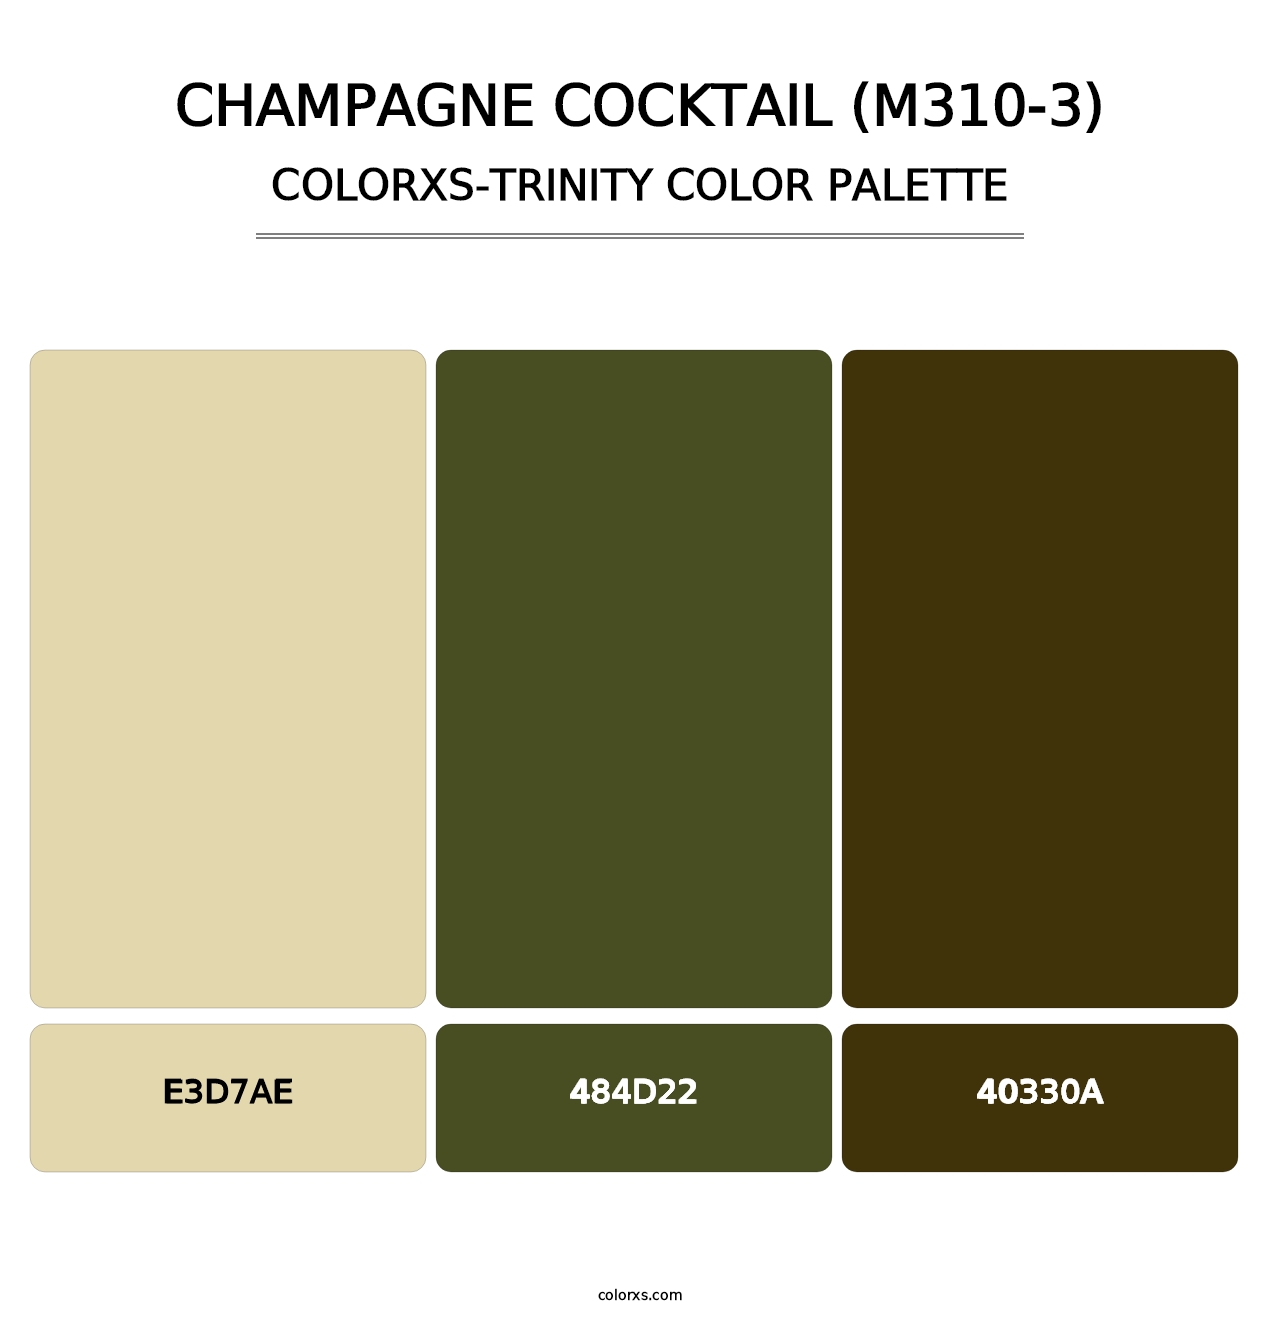 Champagne Cocktail (M310-3) - Colorxs Trinity Palette